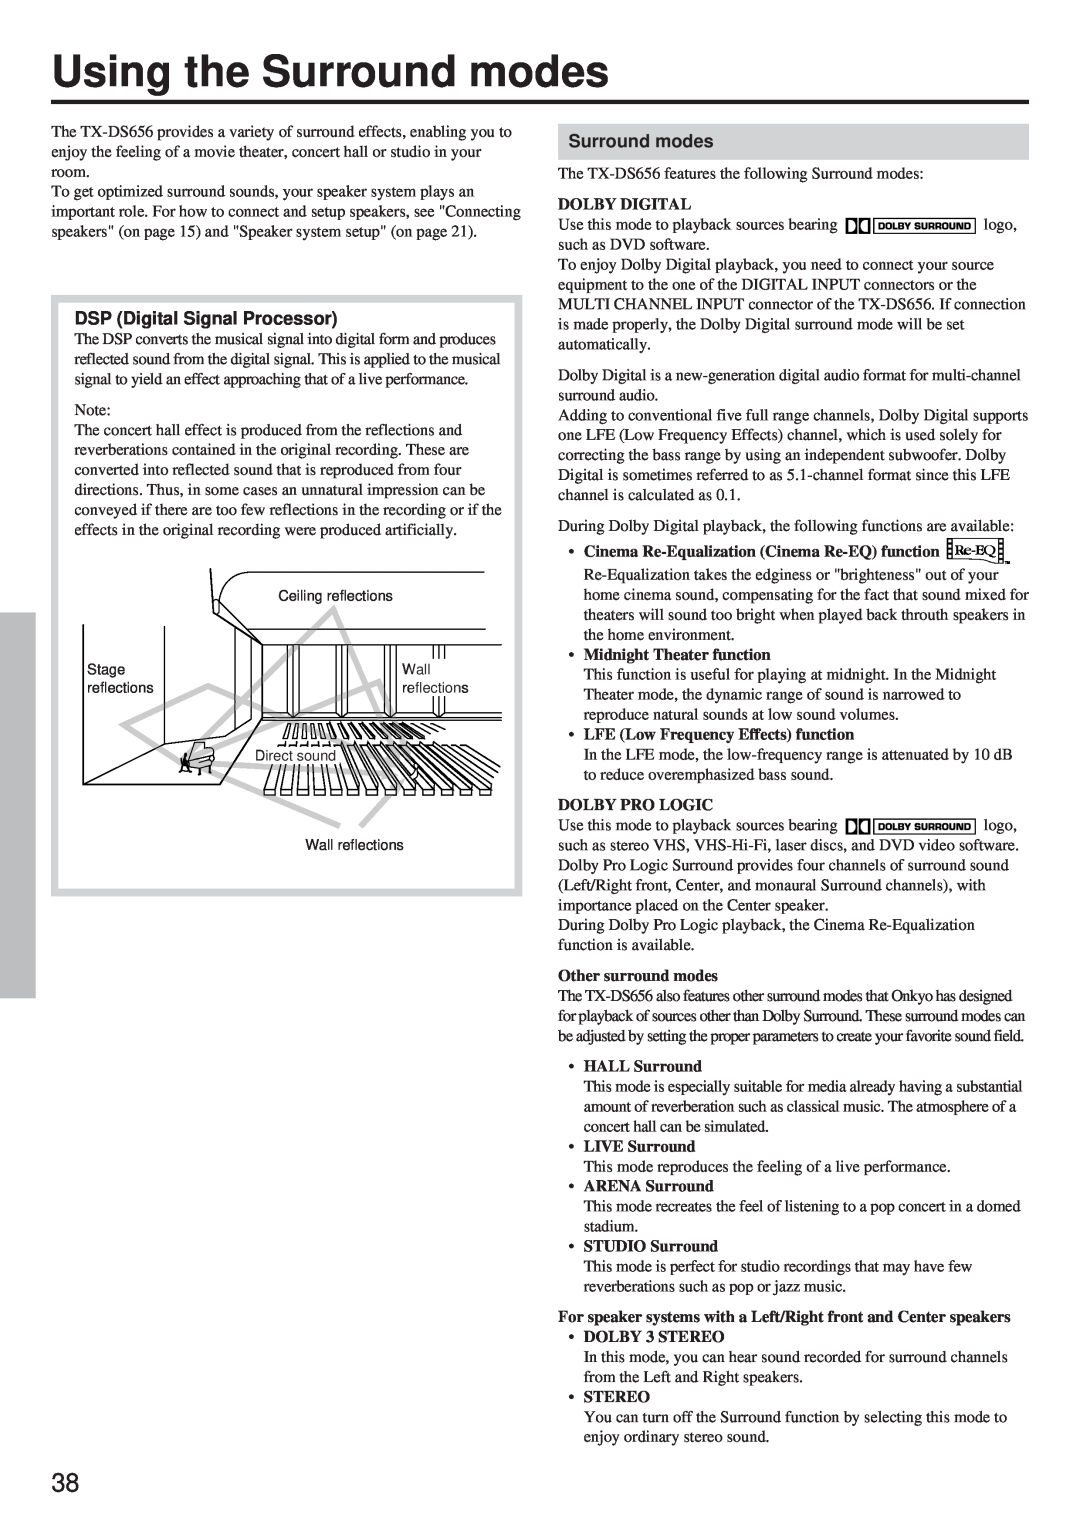 Onkyo TX-DS656 instruction manual Using the Surround modes, DSP Digital Signal Processor 